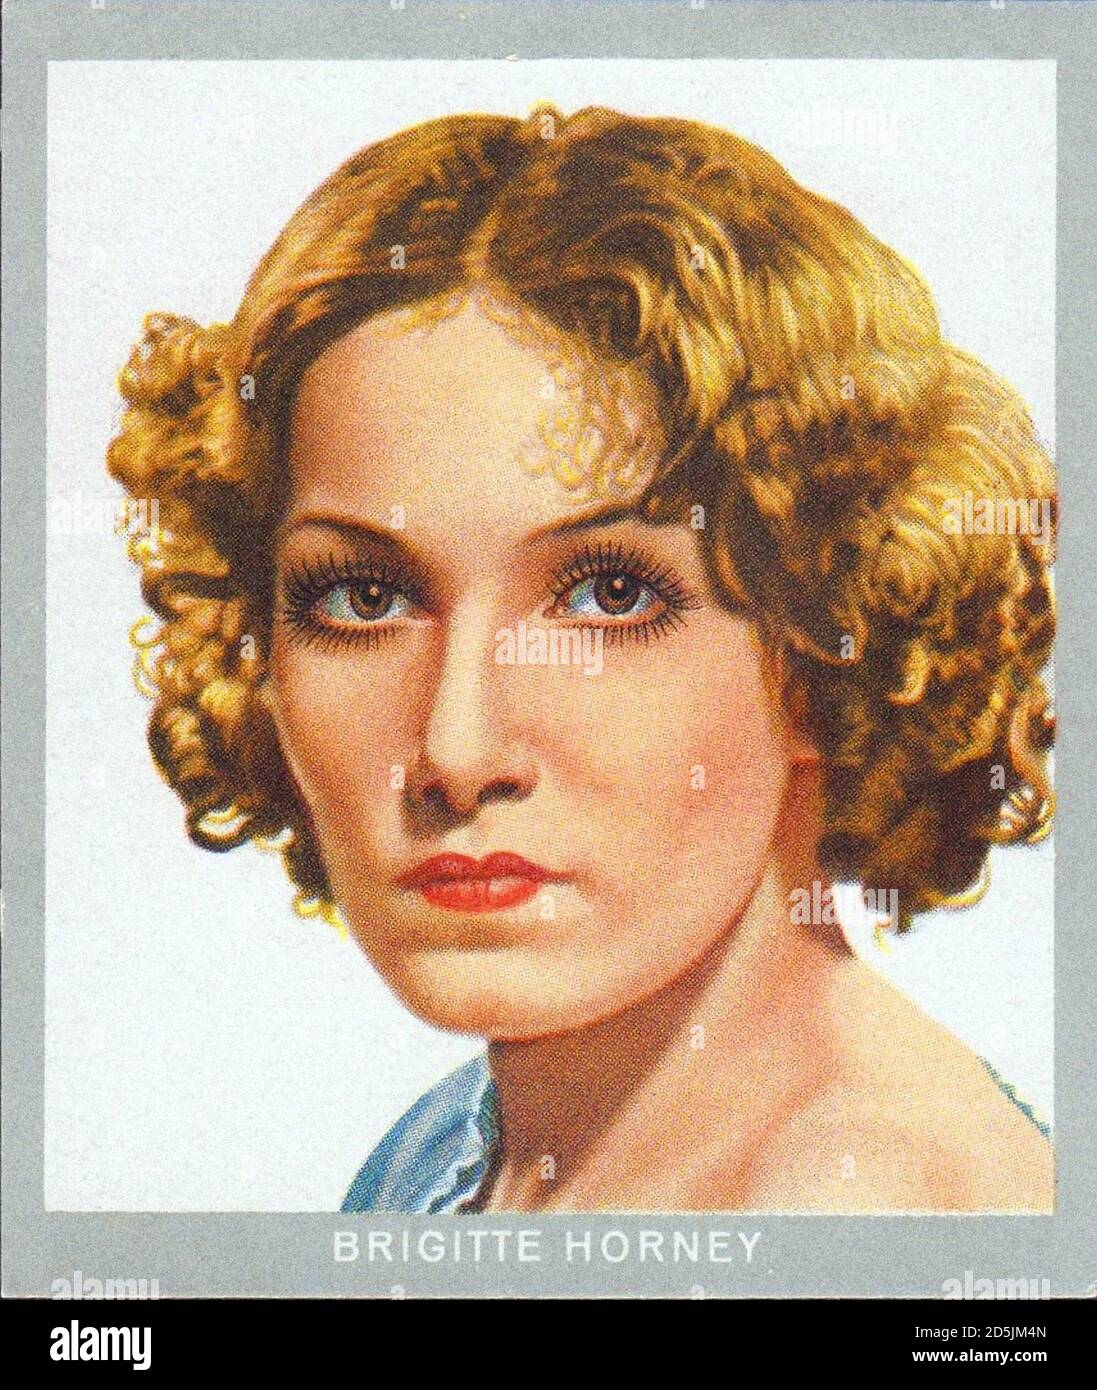 Retro portrait of Brigitte Horney (1911 -1988) was one of the great German actresses, she received an Honorary Bambi award in 1965 for her impressive Stock Photo